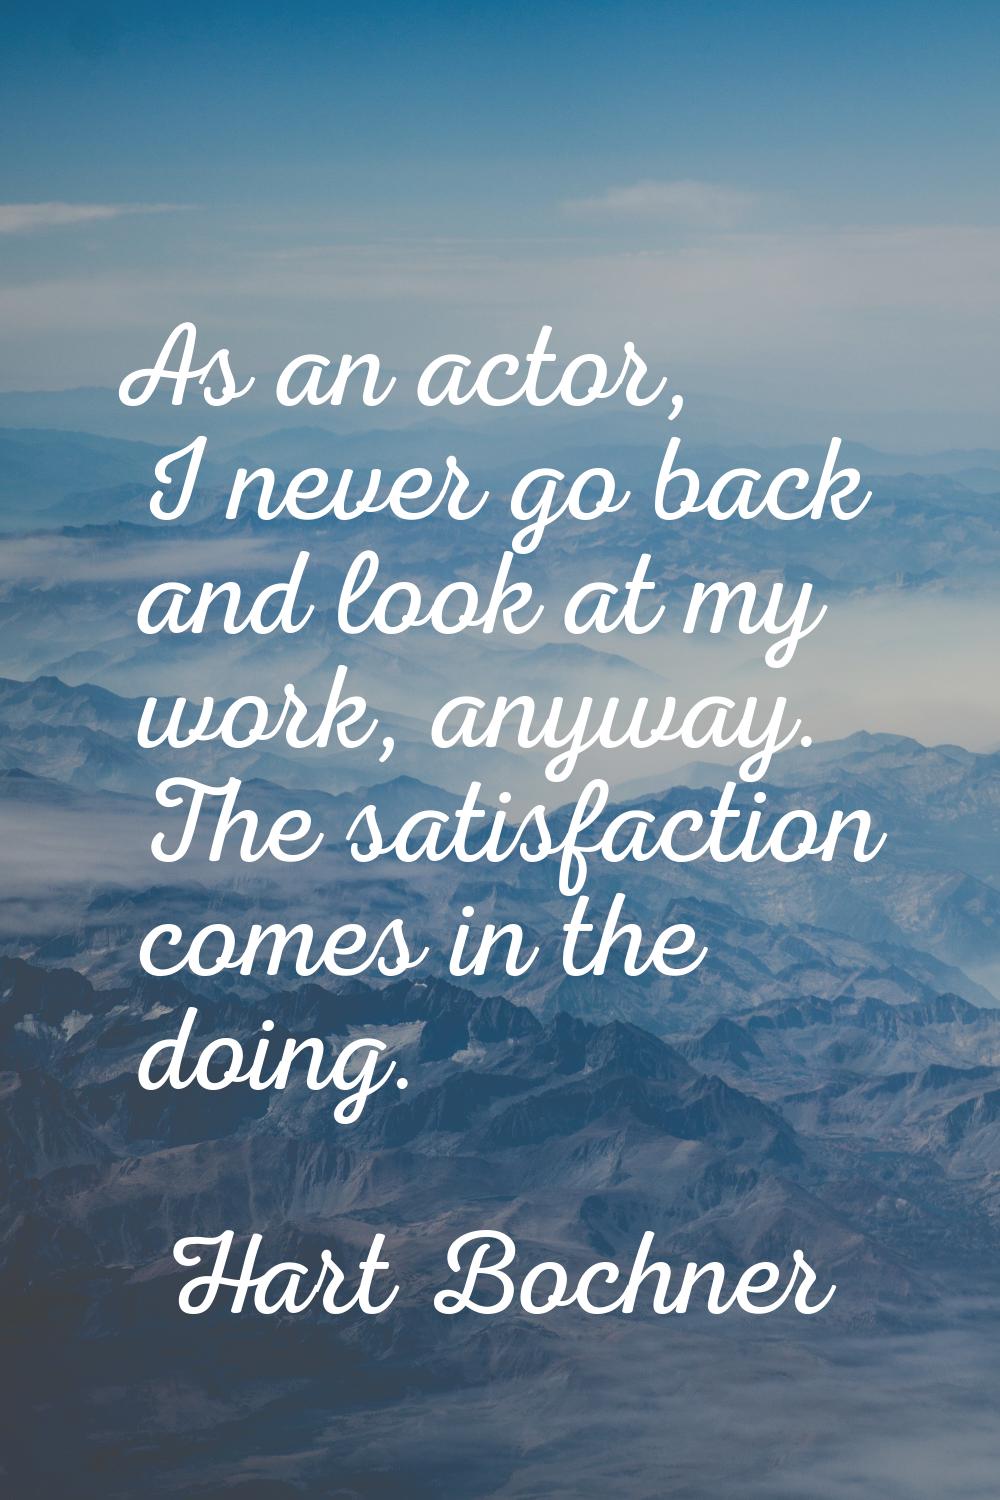 As an actor, I never go back and look at my work, anyway. The satisfaction comes in the doing.